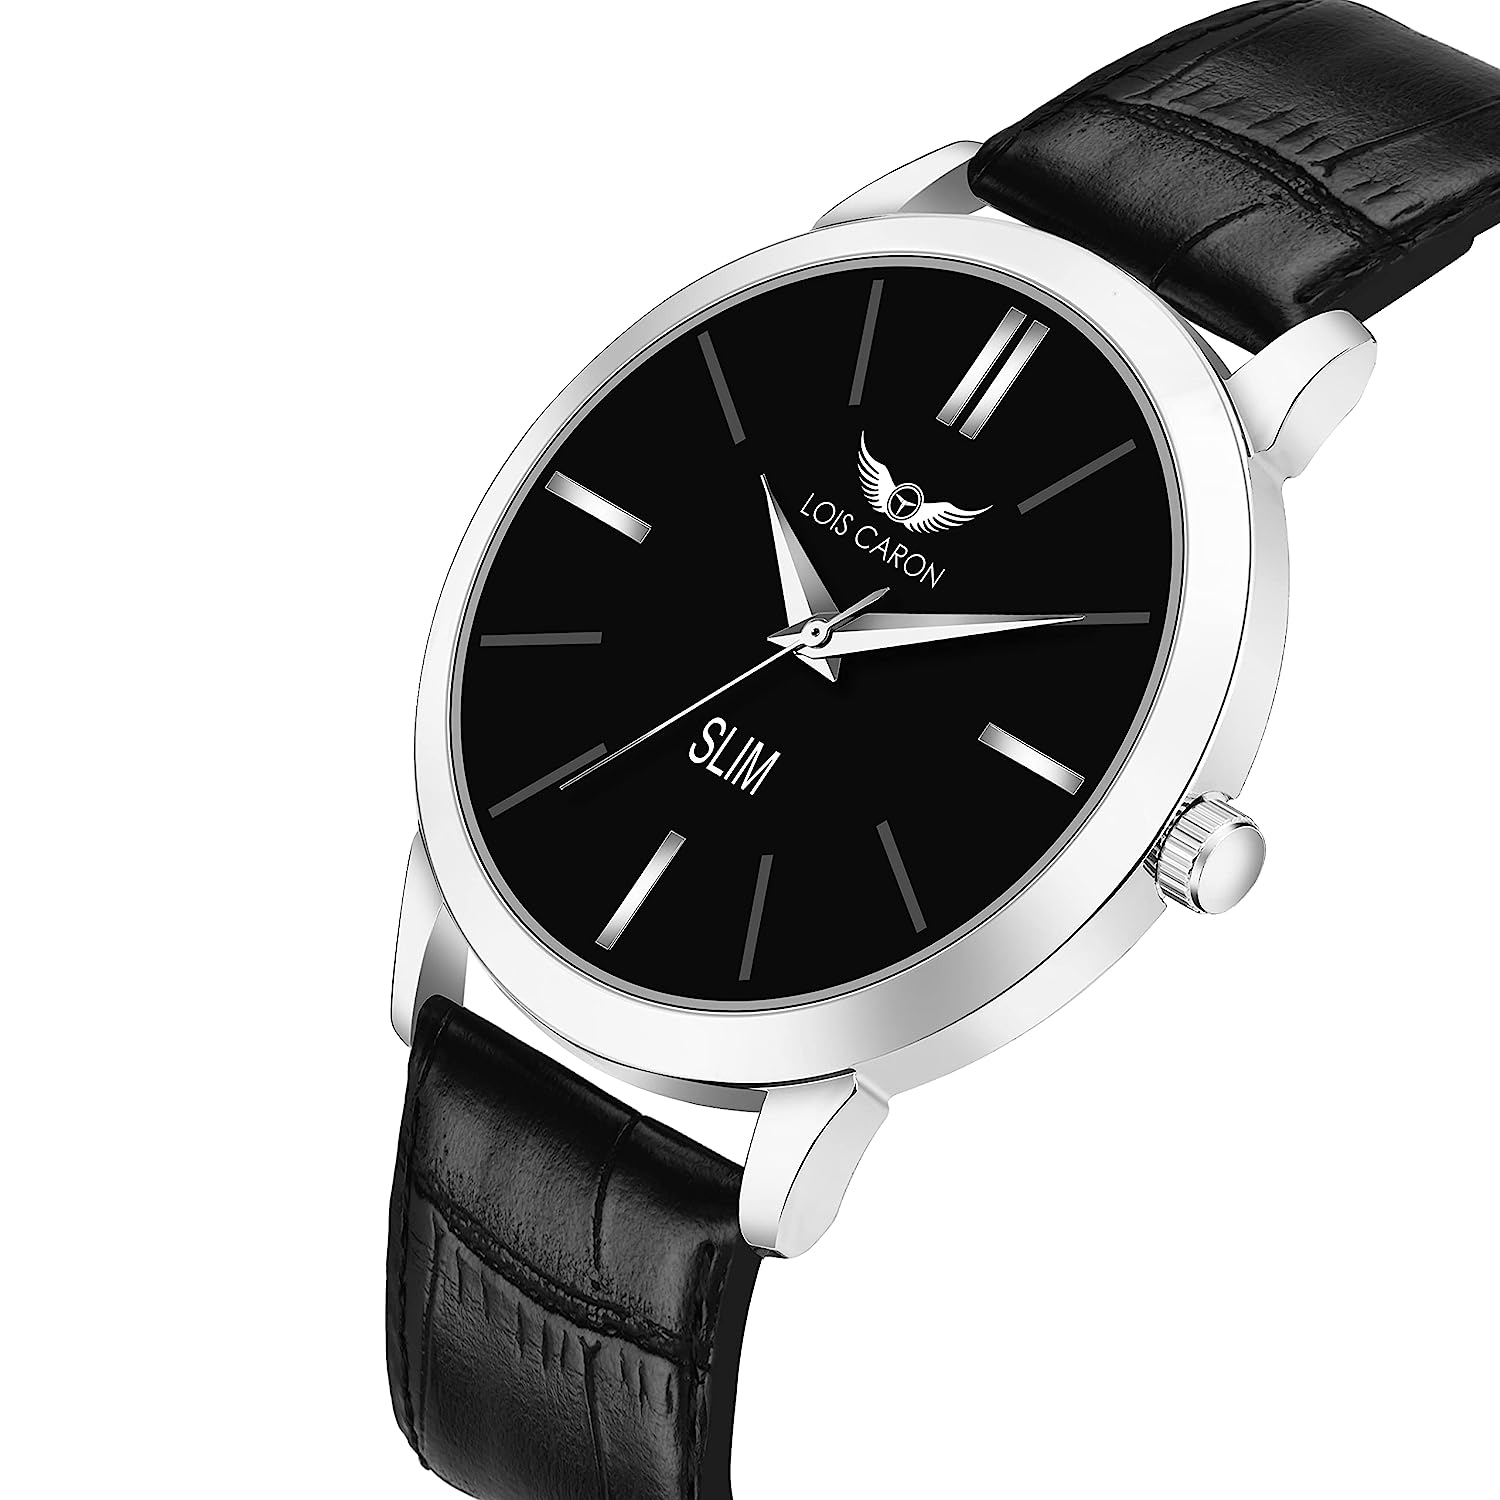 LOIS CARON Ultra Slim Series Black Dial & Black Leather Strap for Boys Analog Watch - for Men LCS-4254